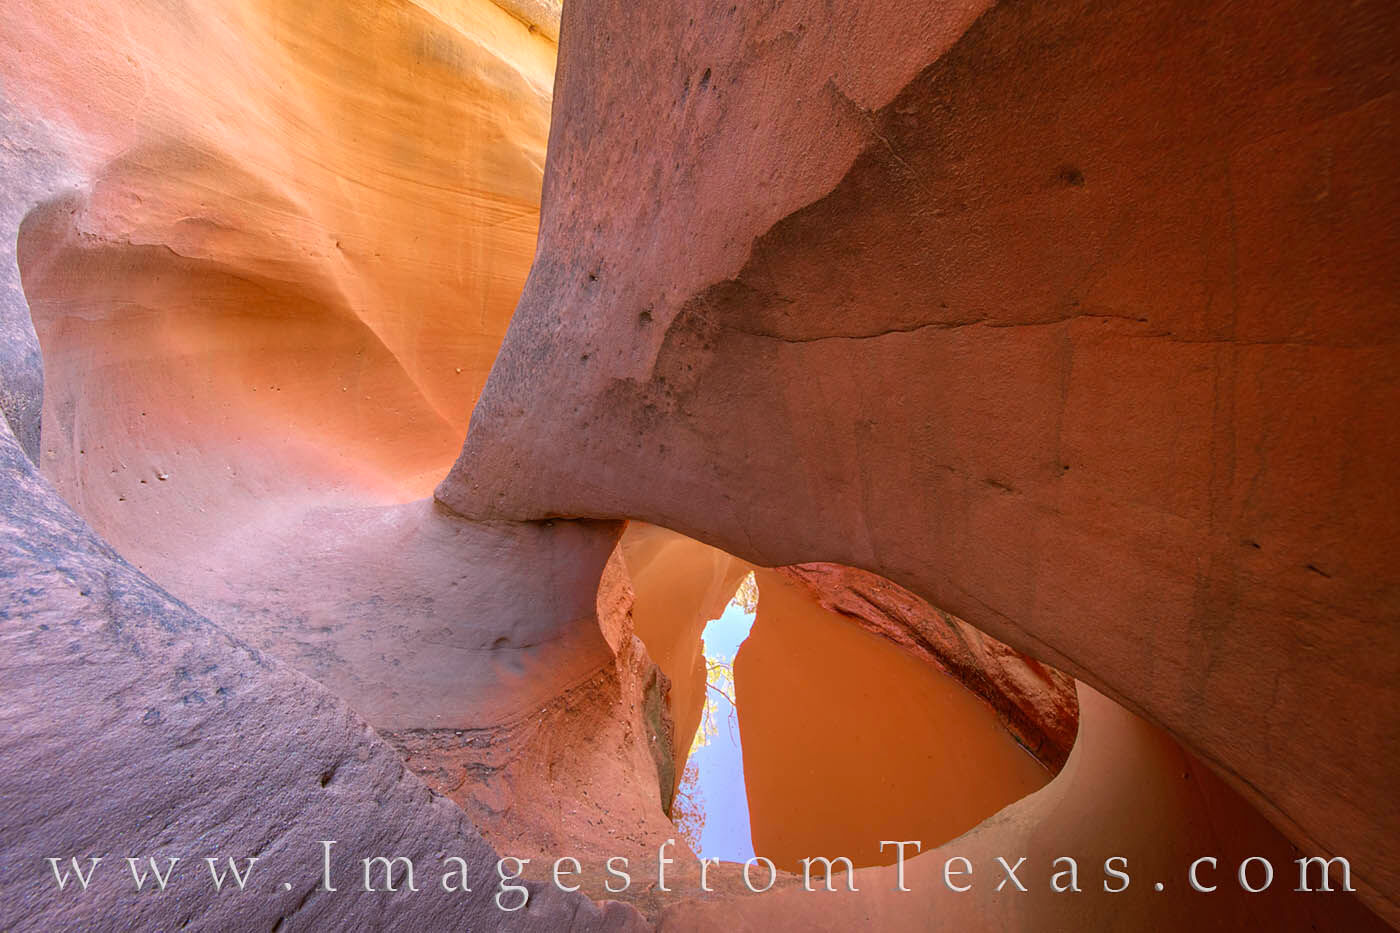 South of Caprock Canyons on a private ranch, this beautiful slot canyon remains in relative obscurity.